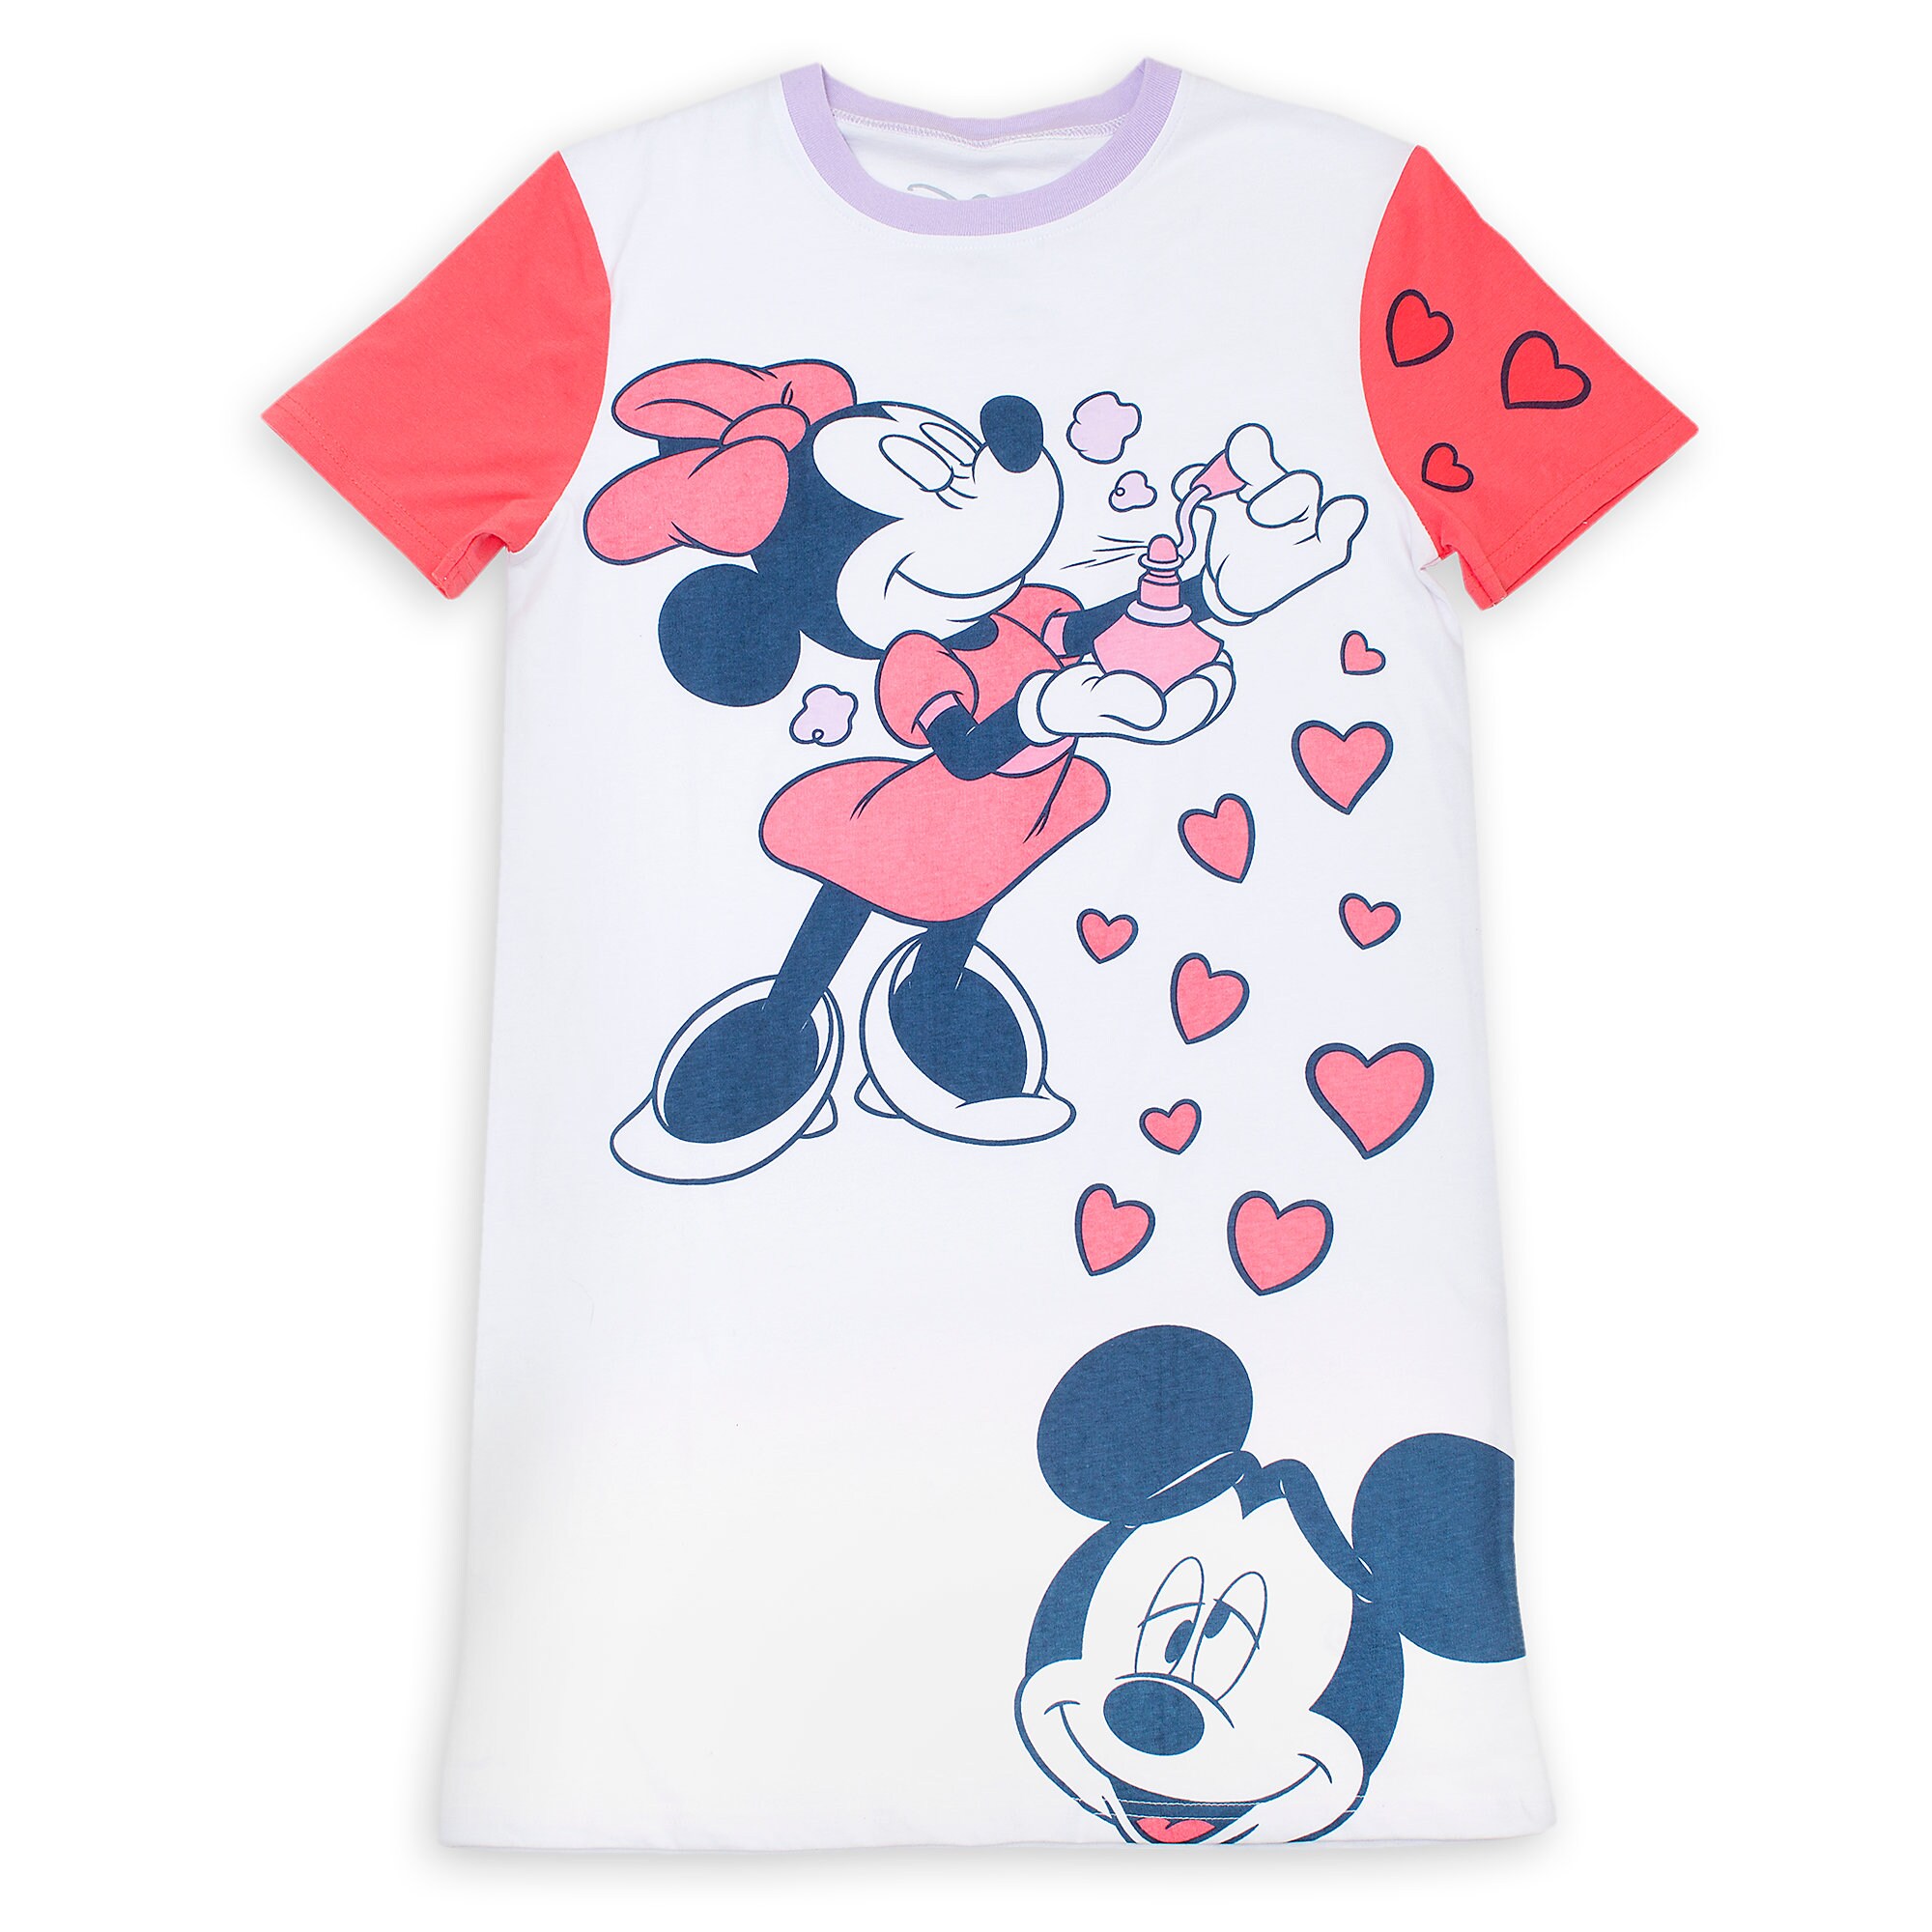 minnie mouse t shirt dress for adults